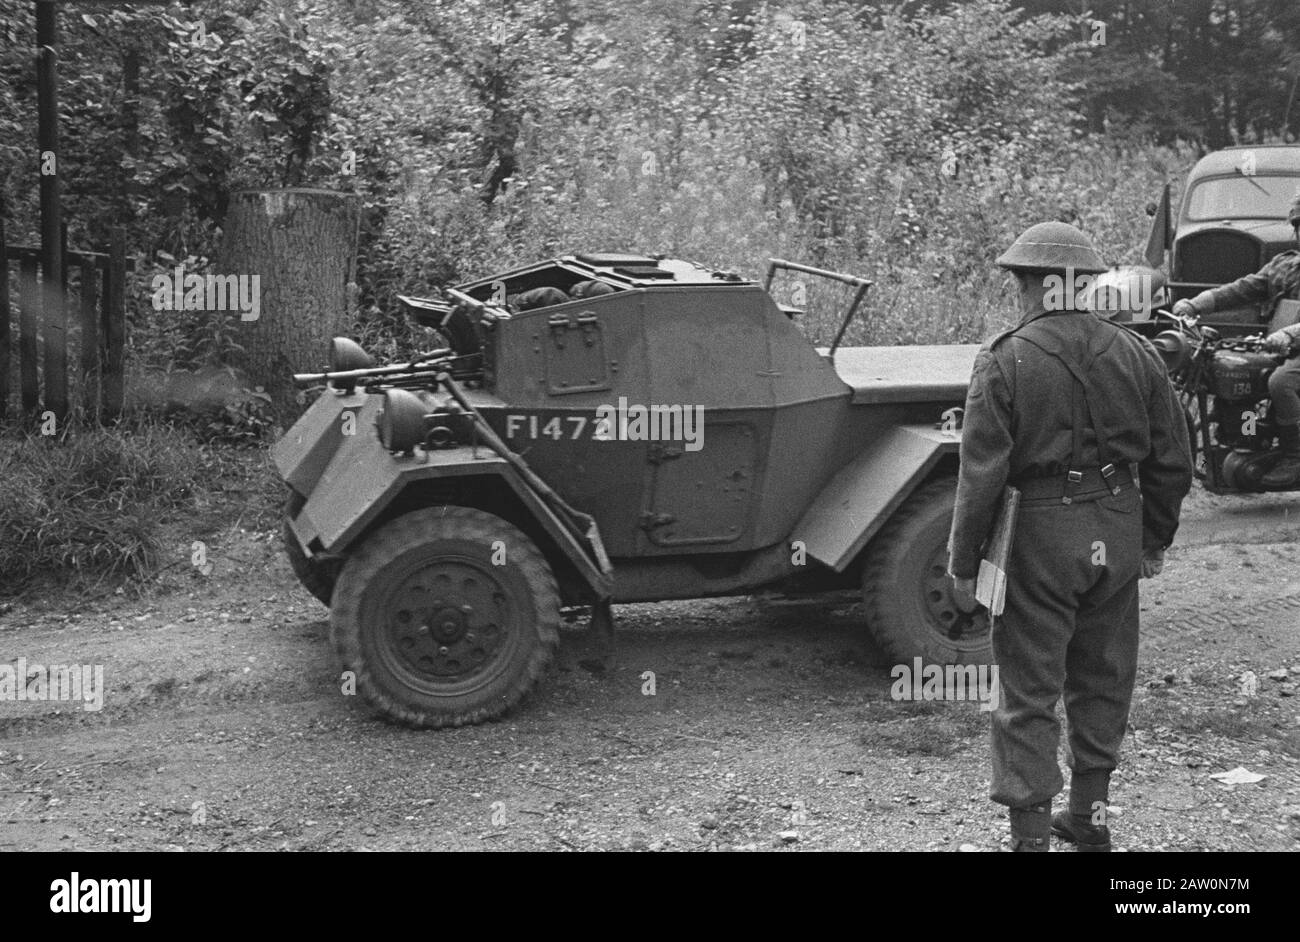 Netherlands Brigade maneuvers. A scoutcar ready to move on [Exercises Princess Irene Brigade. An exploration vehicle ready to go] Annotation: Daimler Scout Car (Dingo) Date: August 1943 Location: United Kingdom Keywords: army maneuvers, soldiers, World War II Stock Photo